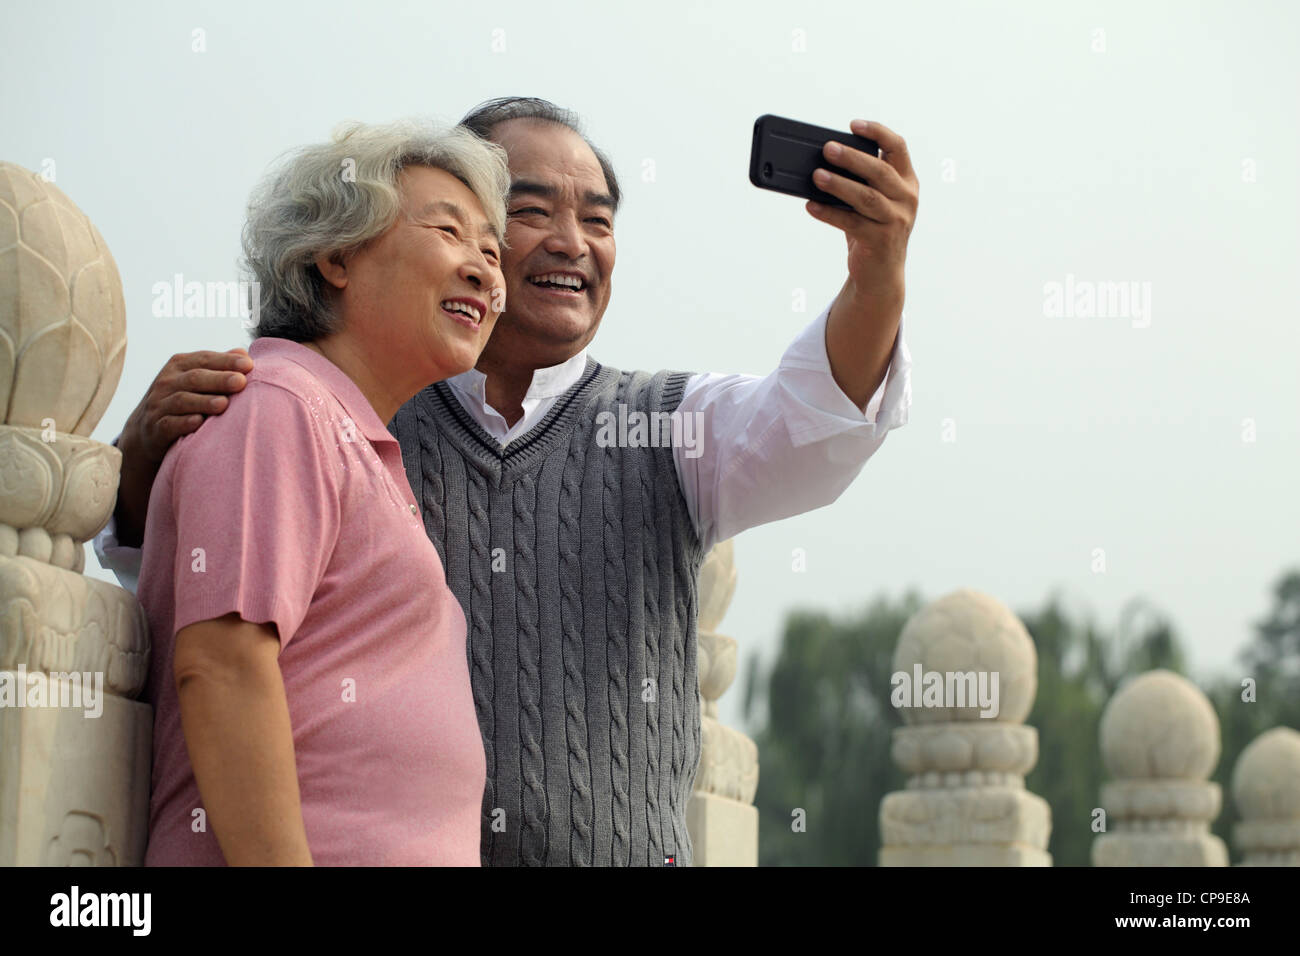 Older couple smiling and taking a photo of each other Stock Photo